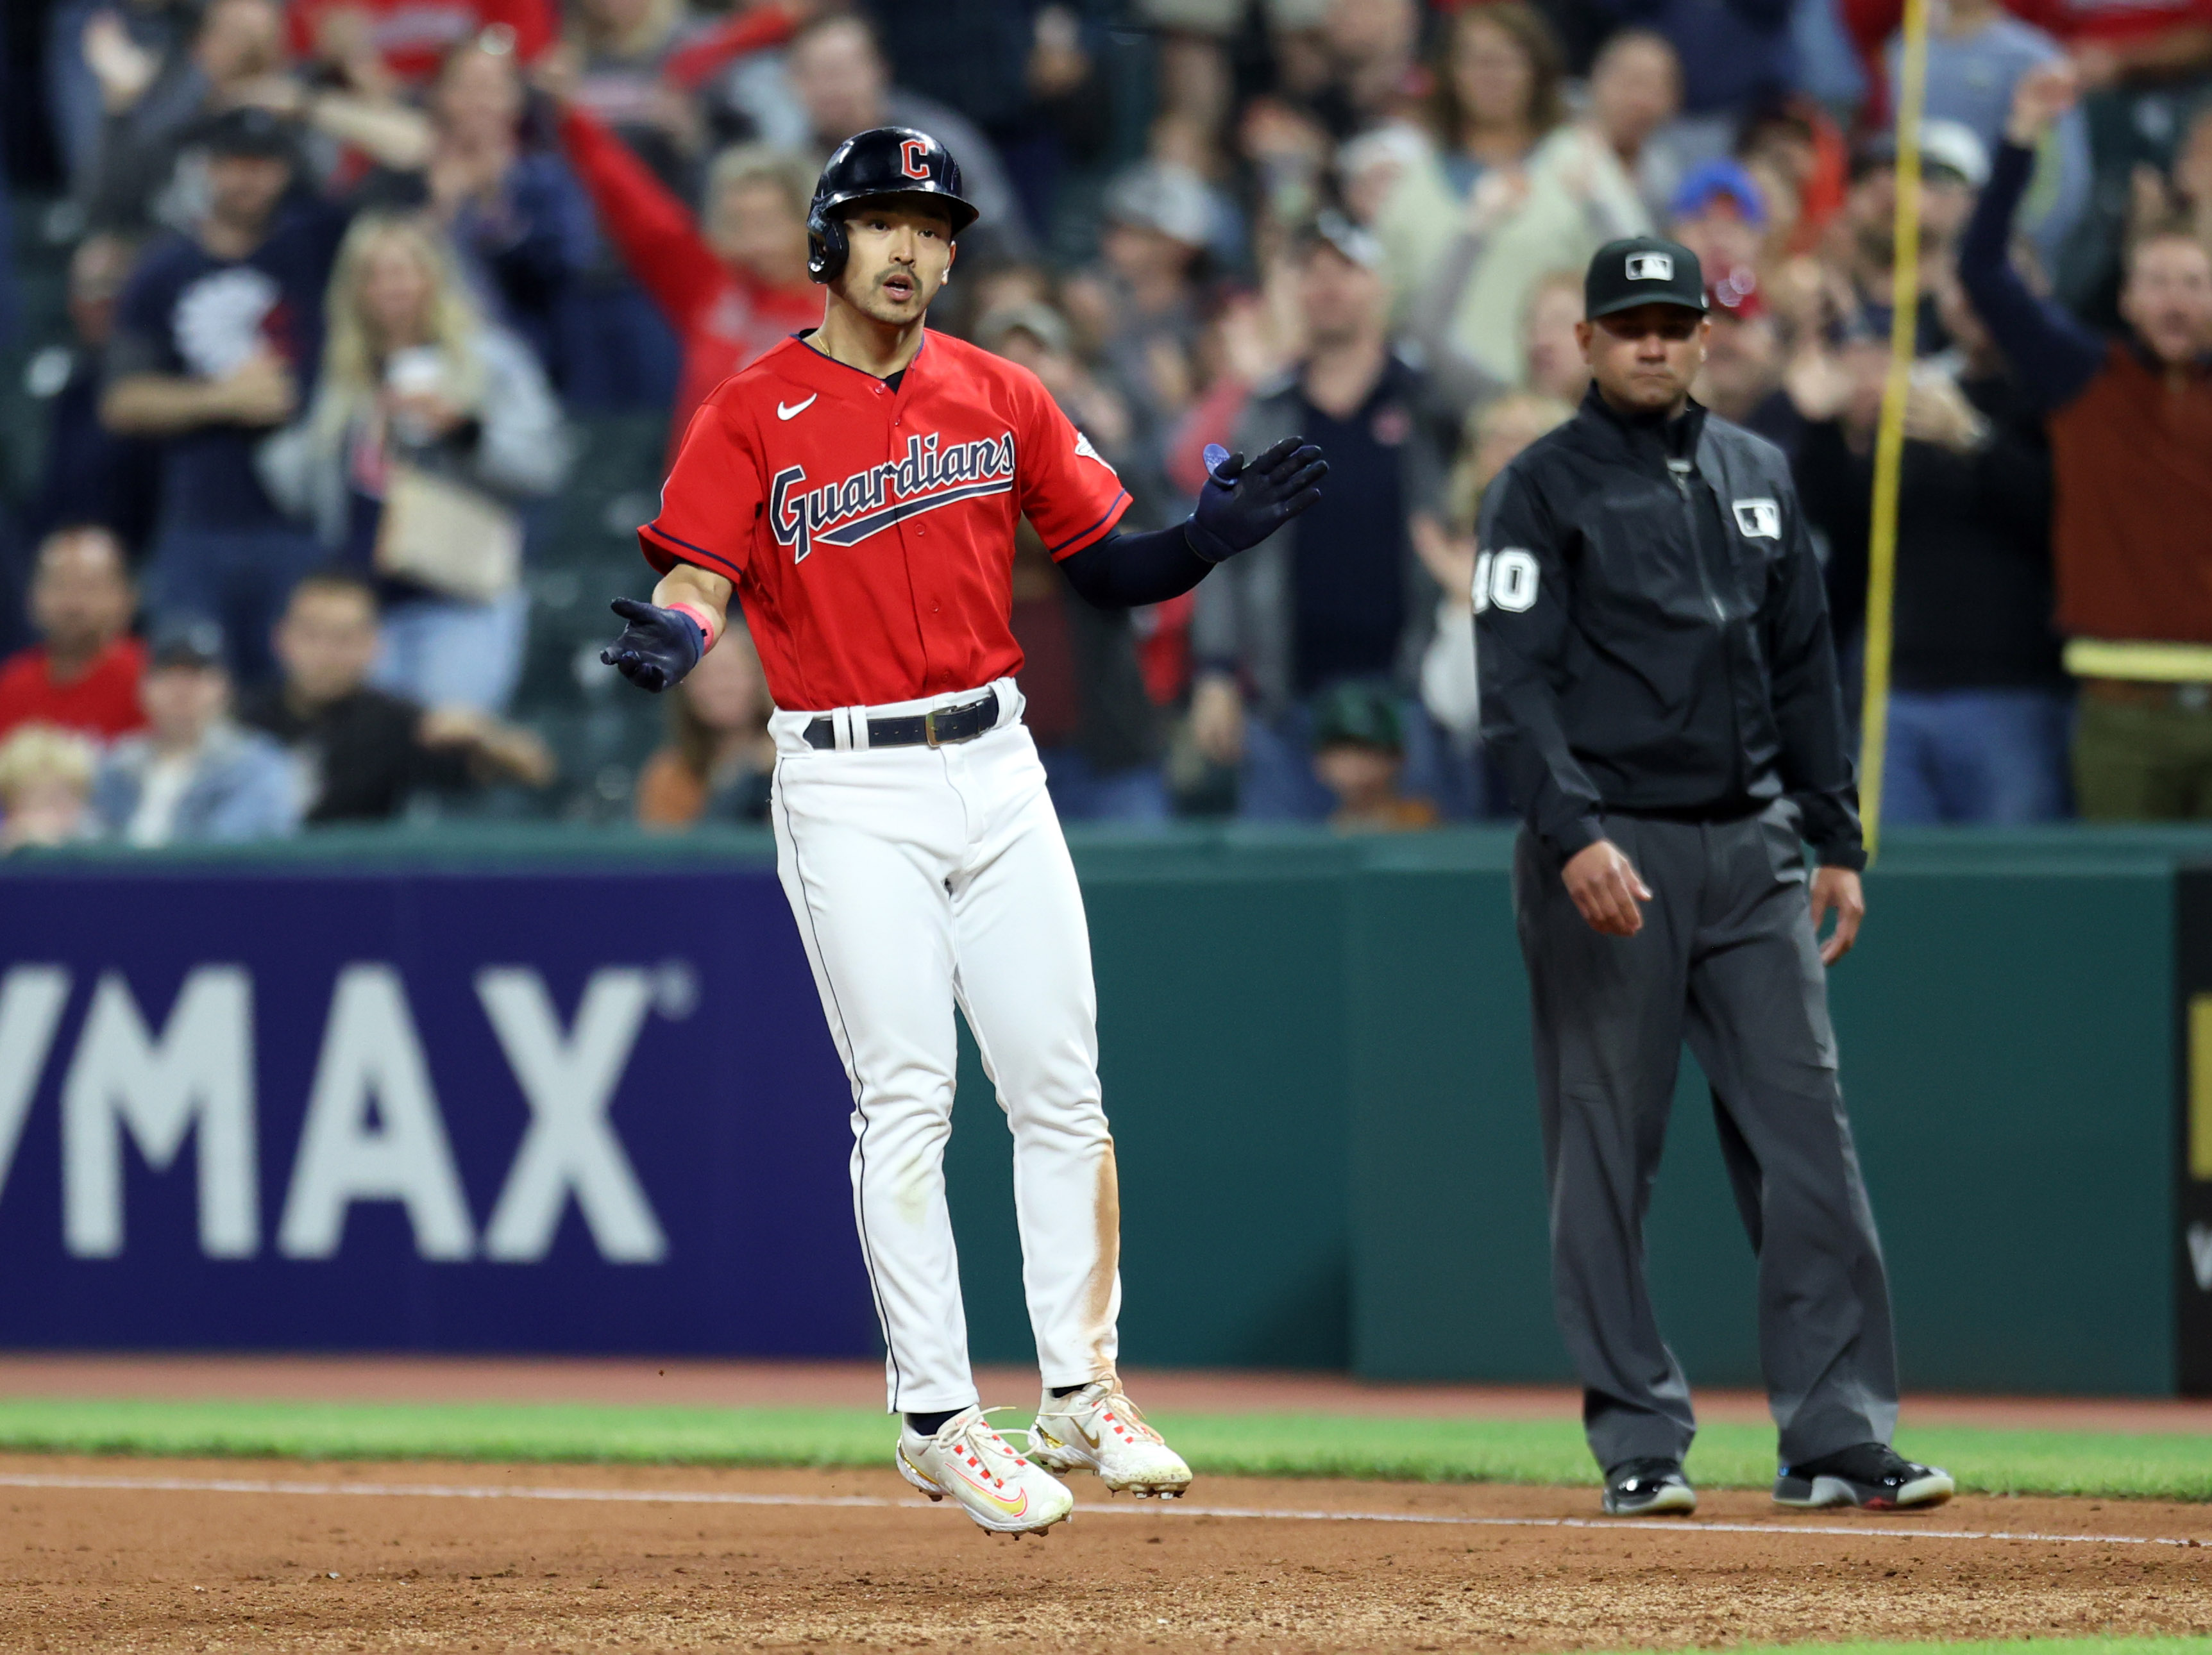 Can the Guardians' offensive woes be traced to Steven Kwan's injury? Hey,  Hoynsie 